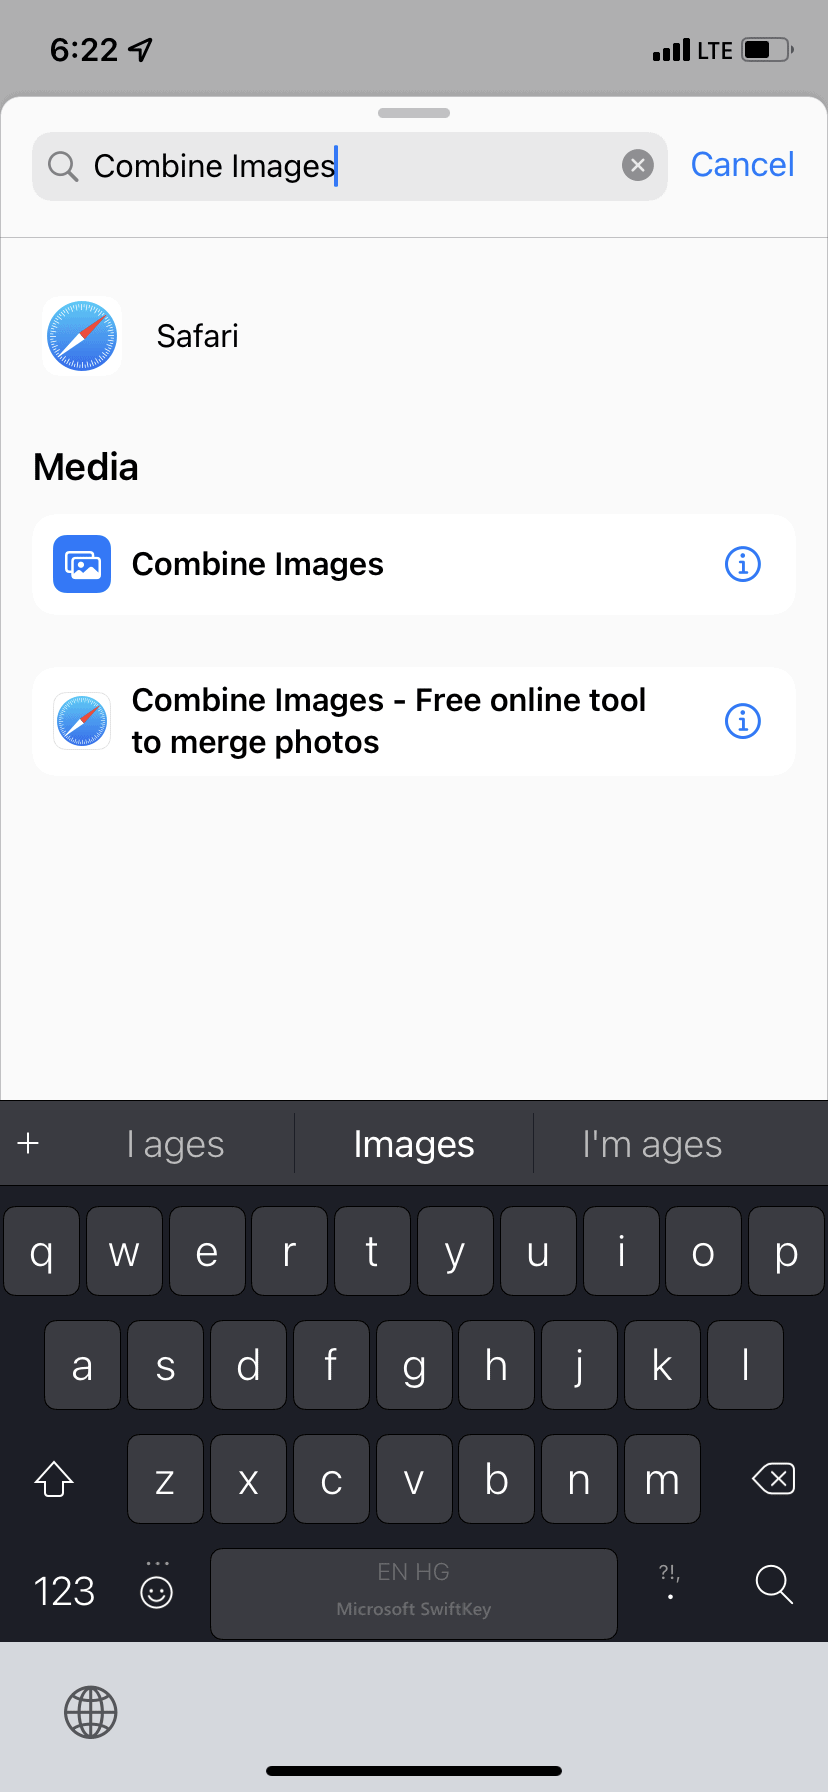 Combine Images Action in iOS Shortcuts app